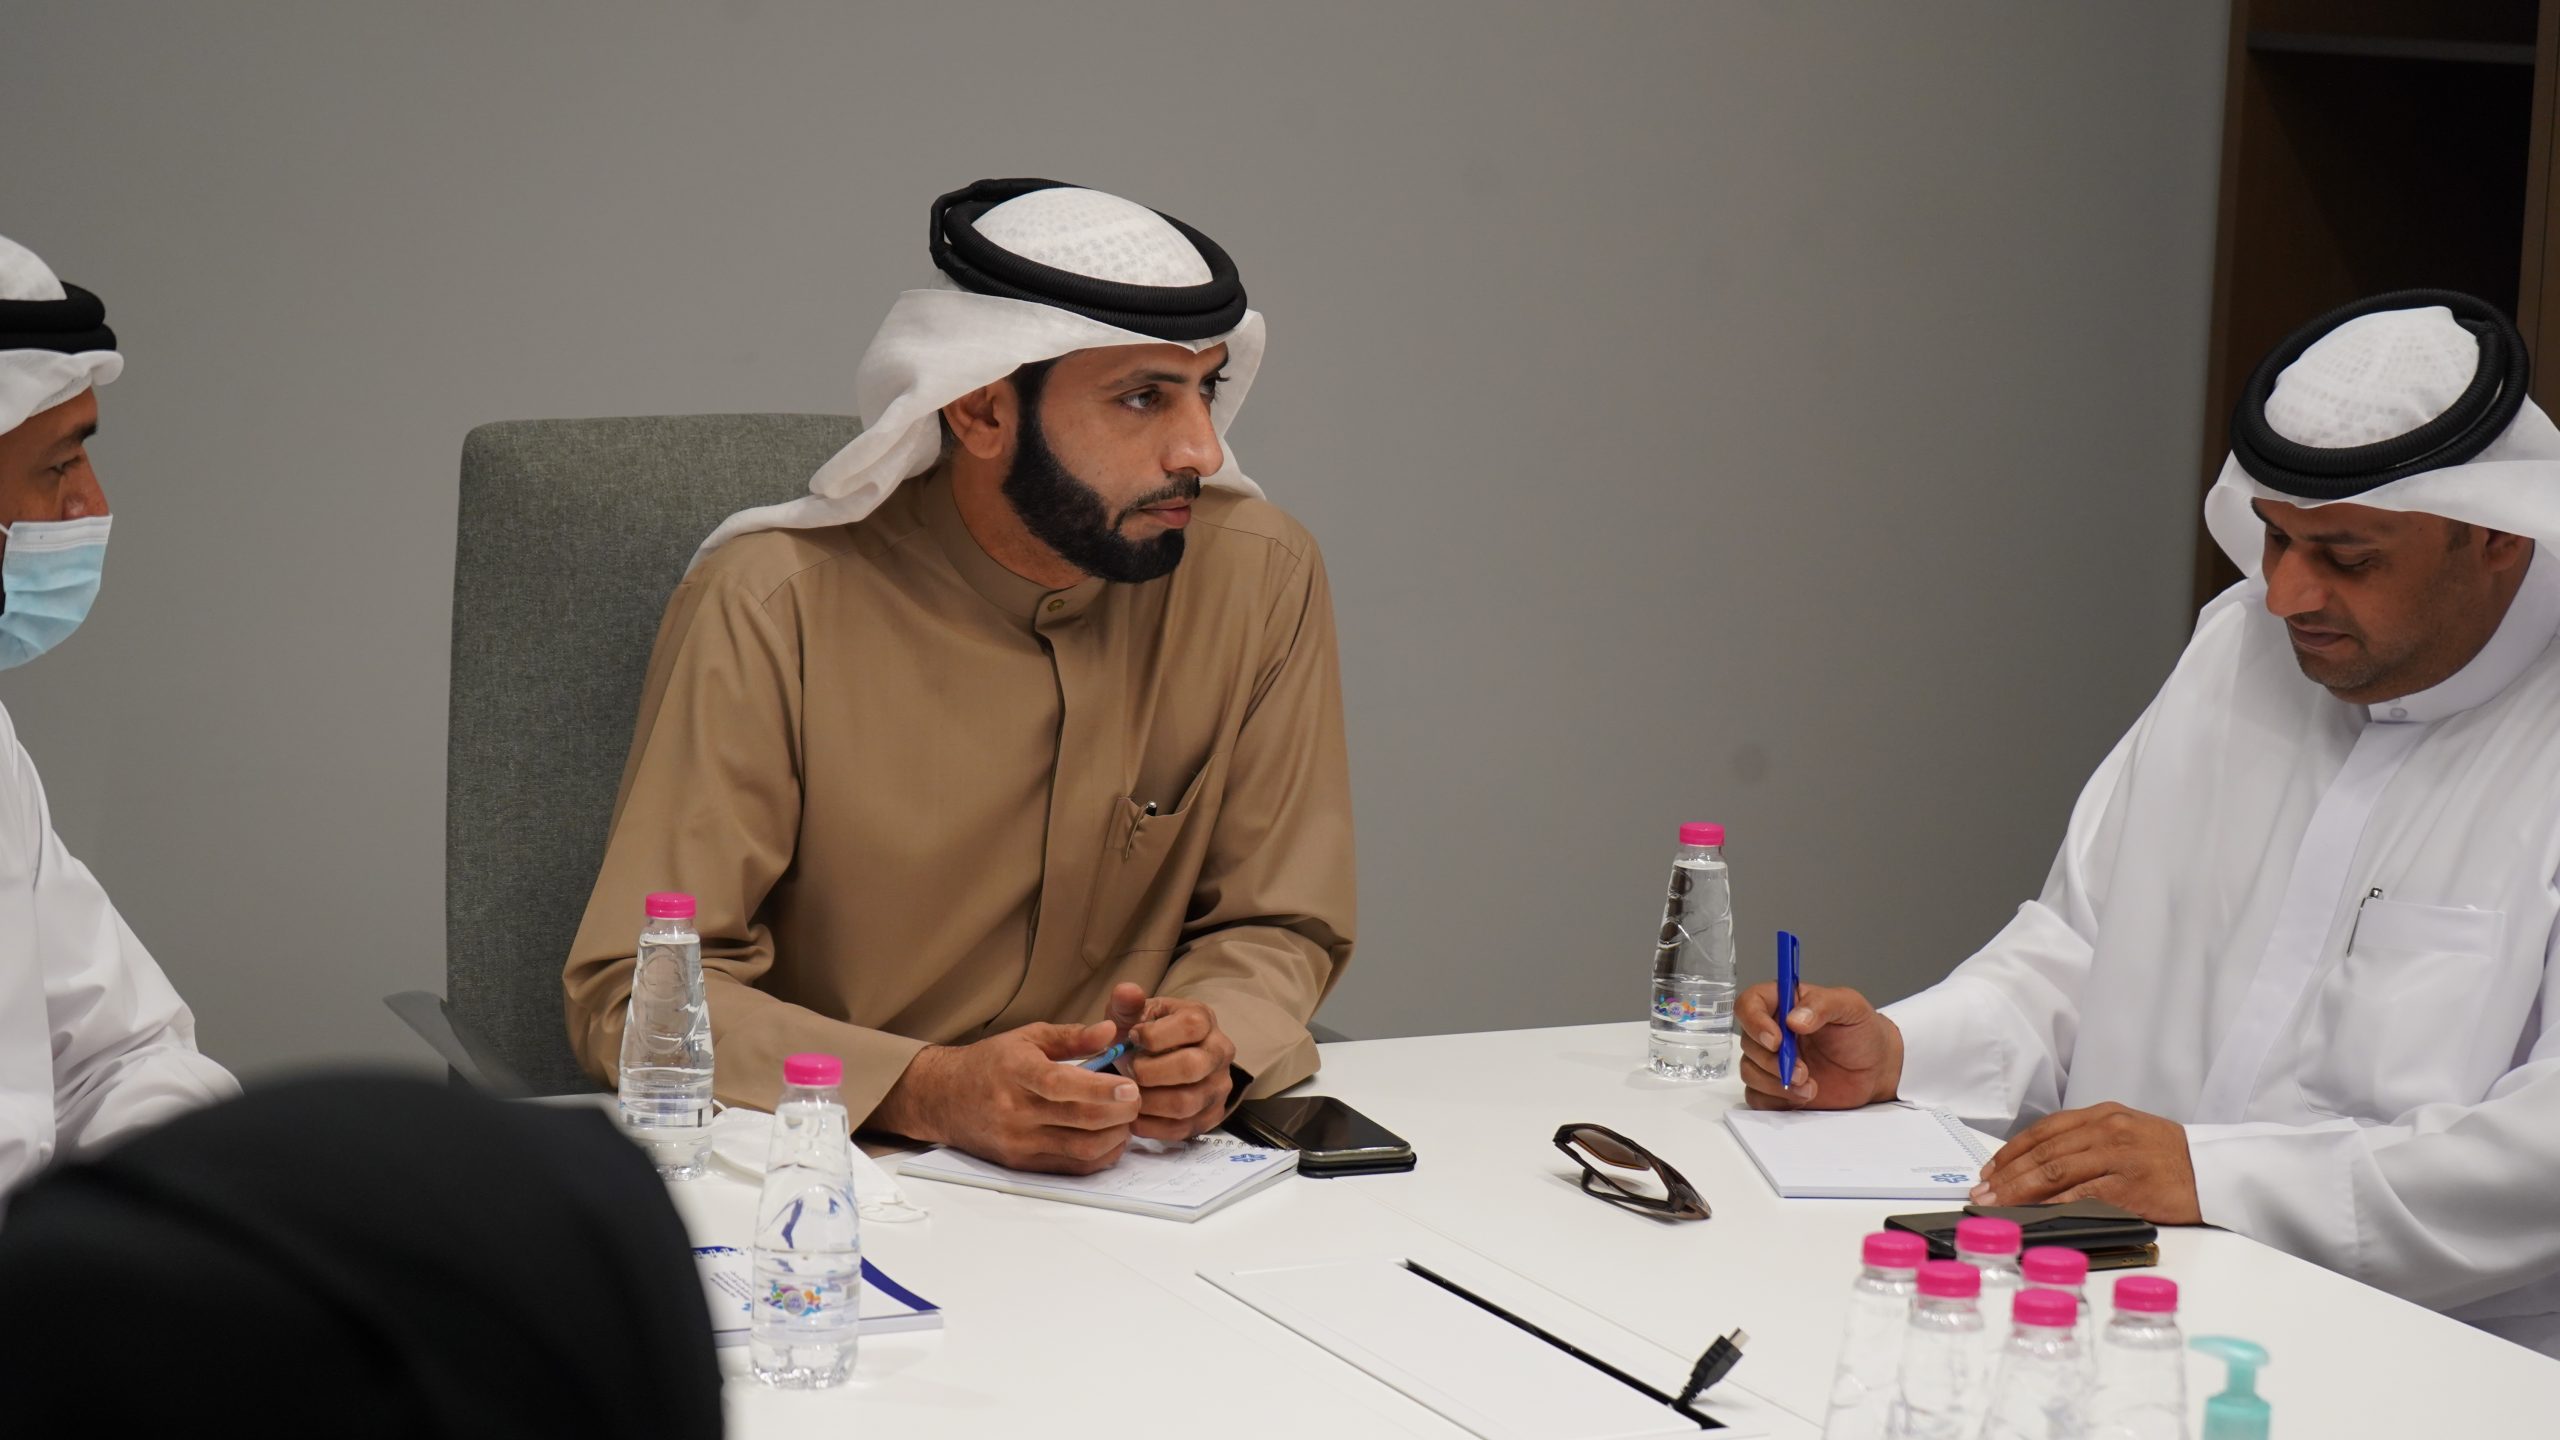 “Identity and Citizenship” organizes a brainstorming session as part of the innovation activities in Sharjah